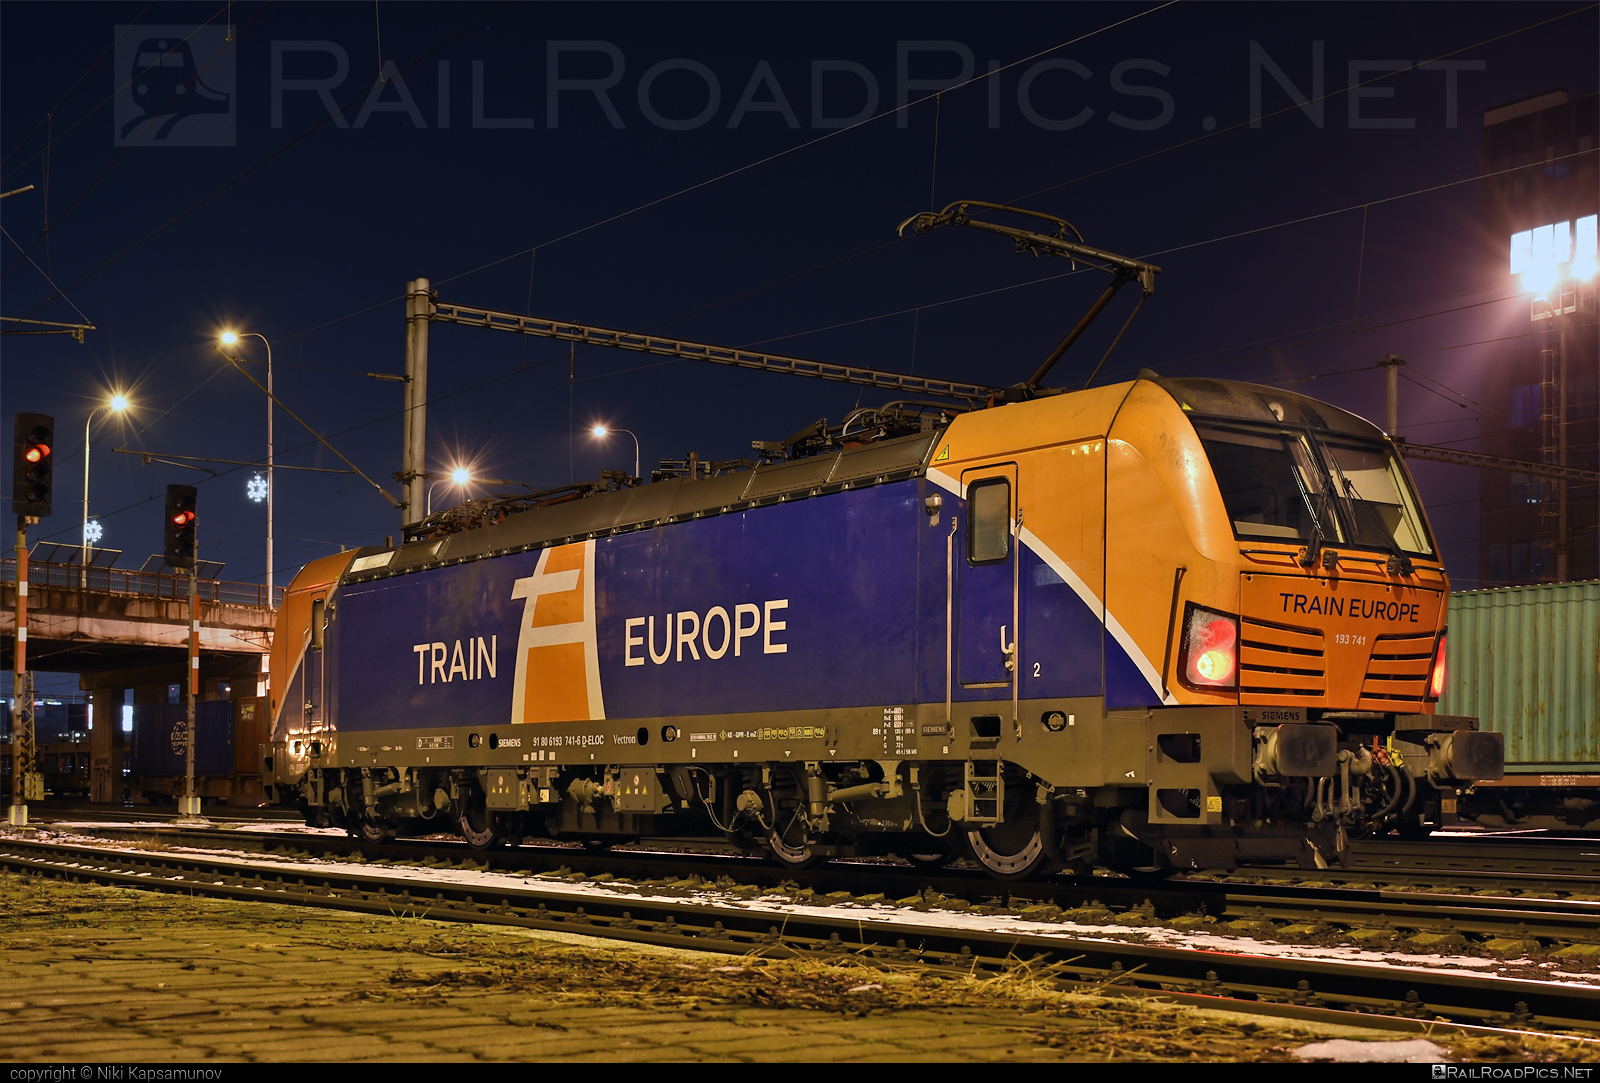 Siemens Vectron MS - 193 741 operated by LOKORAIL, a.s. #ell #ellgermany #eloc #europeanlocomotiveleasing #lokorail #lrl #siemens #siemensVectron #siemensVectronMS #traineurope #vectron #vectronMS